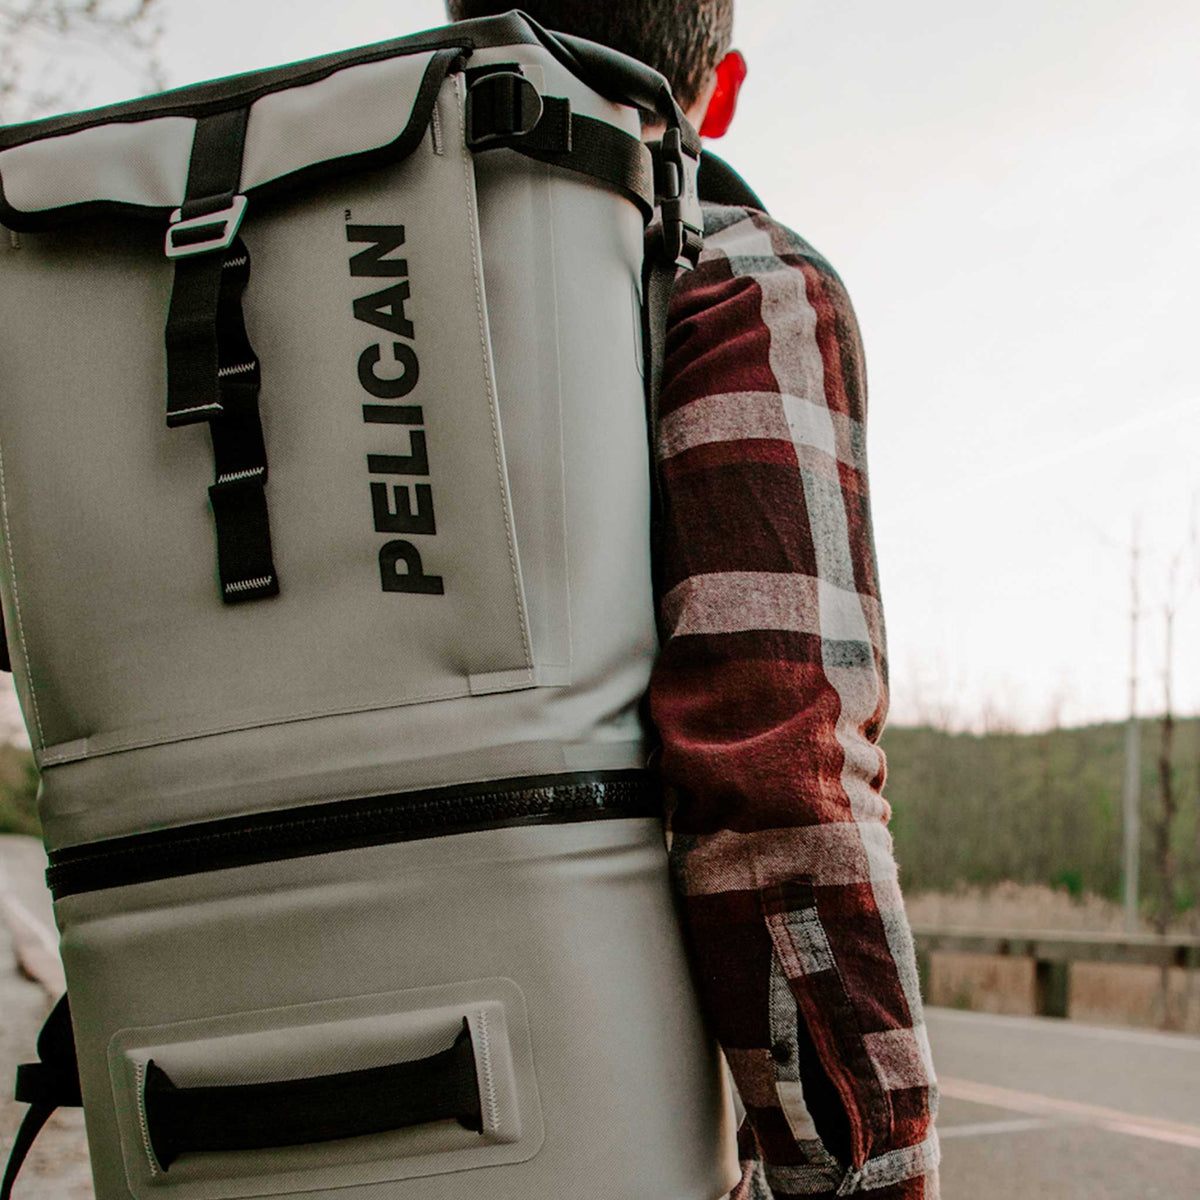 SOFT-CBKPK-LGRY Pelican™ Dayventure Backpack Soft Cooler being used outside